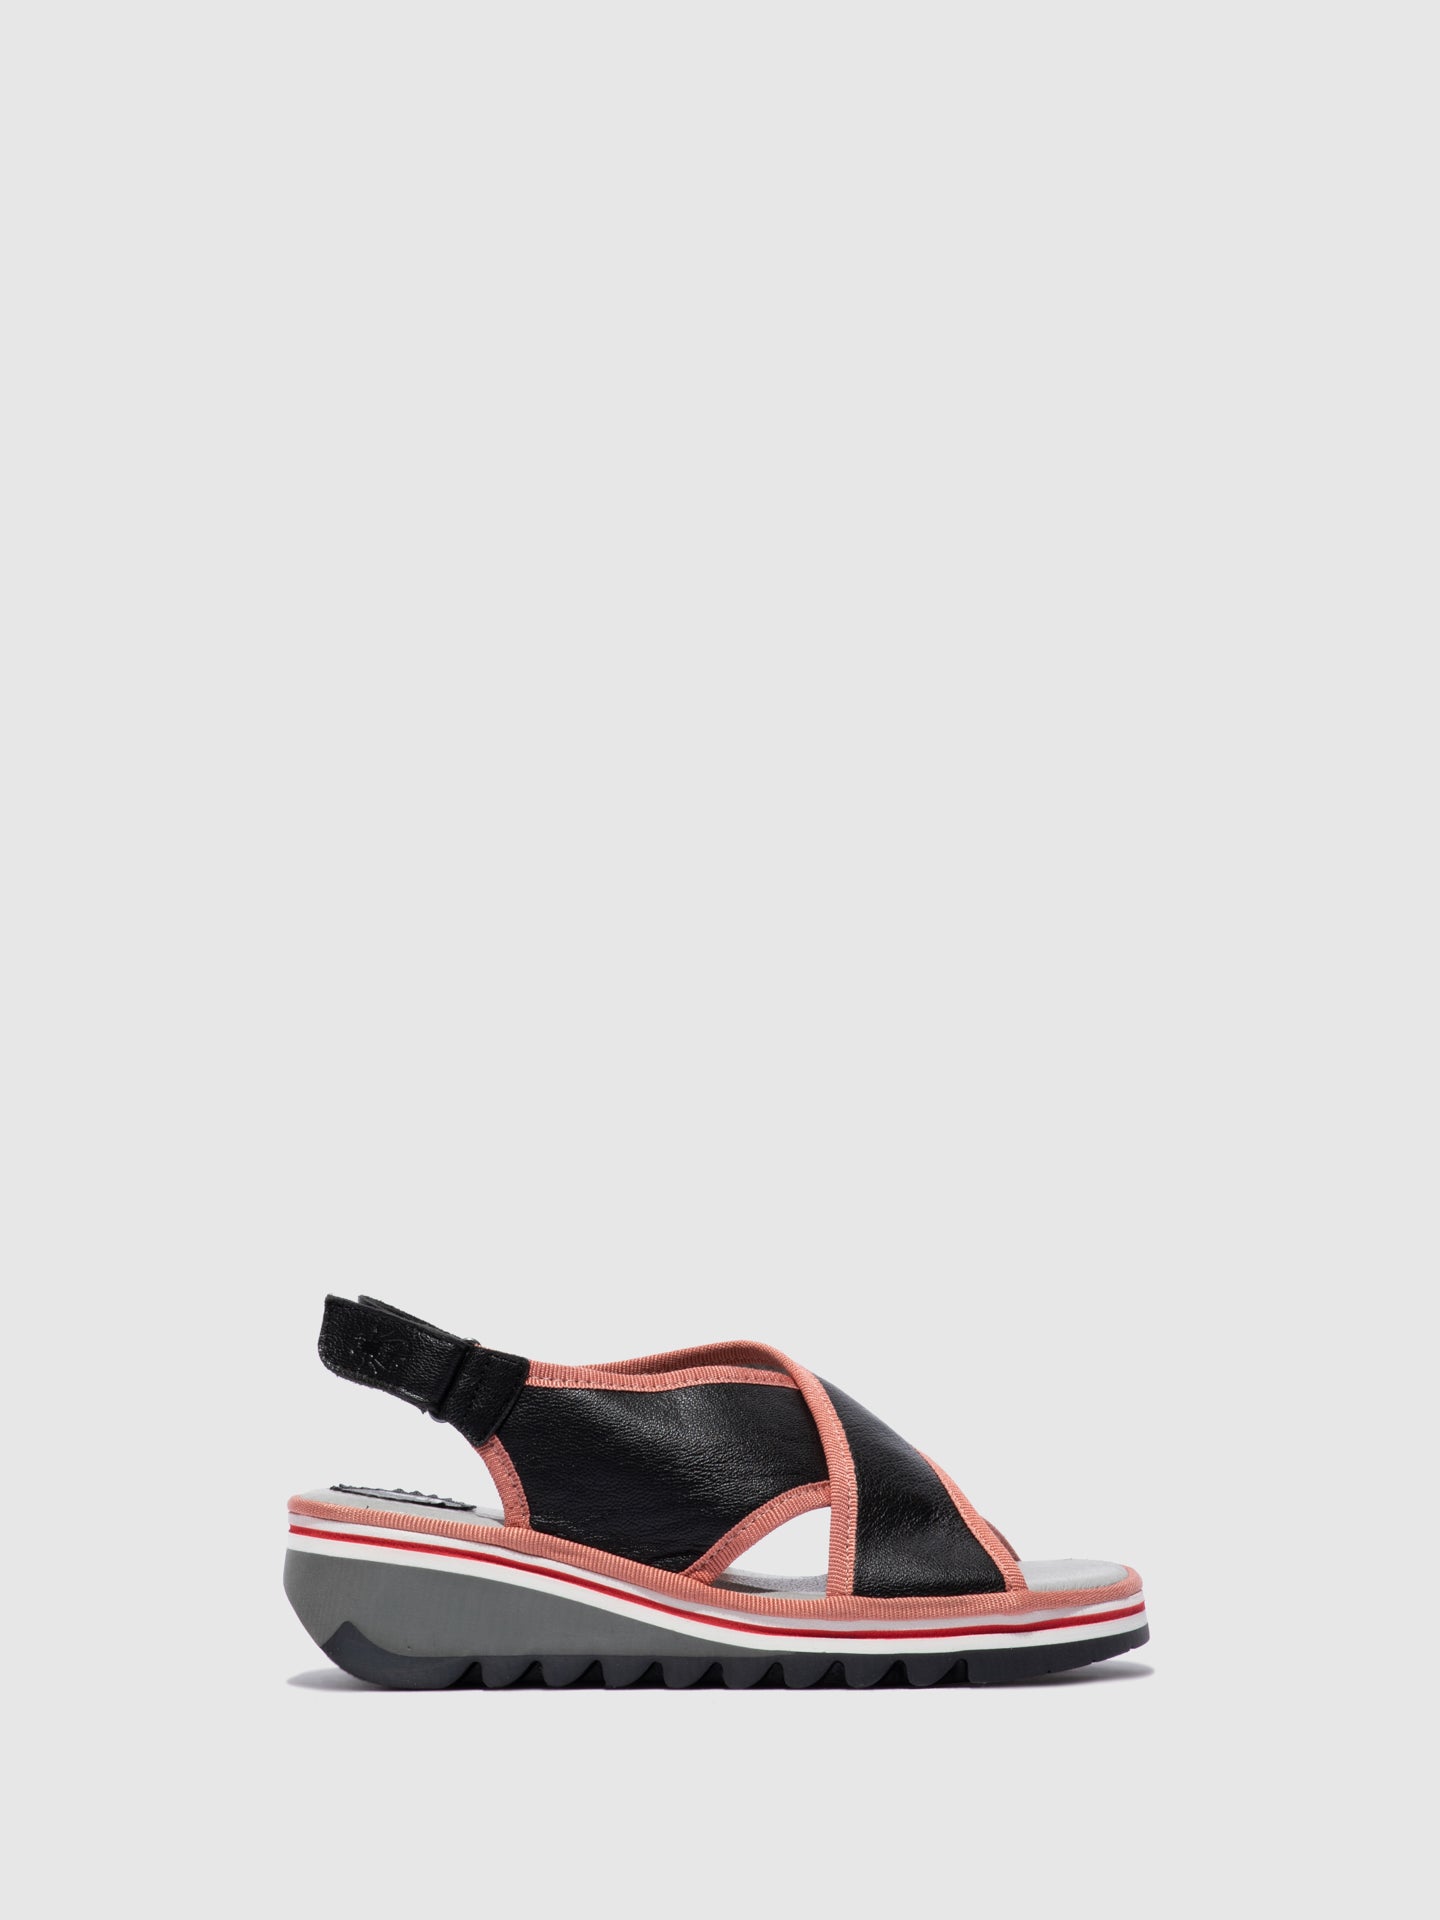 Fly London Crossover Sandals TANO133FLY BLACK (PINK)